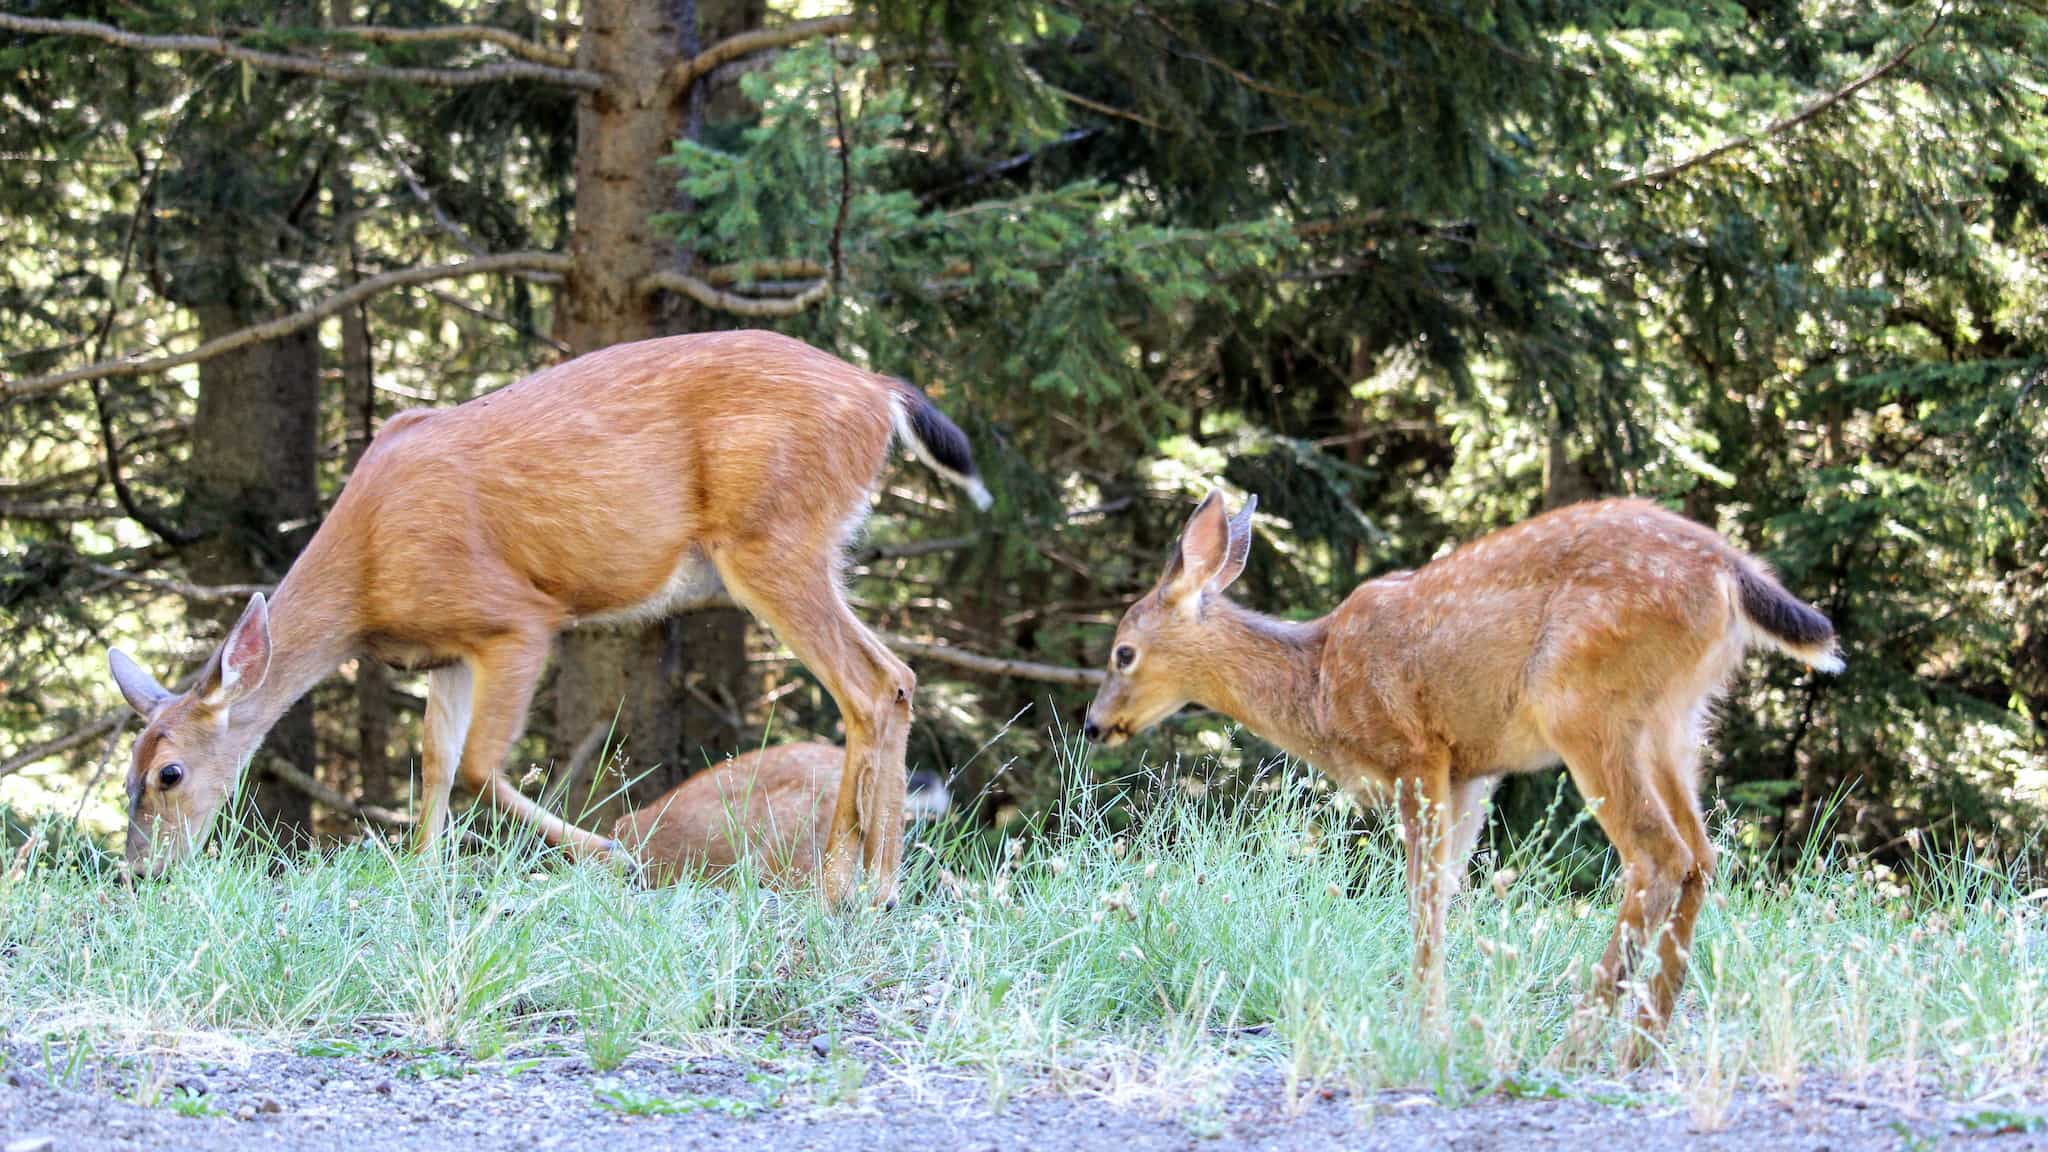 A deer foal and its mother on the side of a mountain road